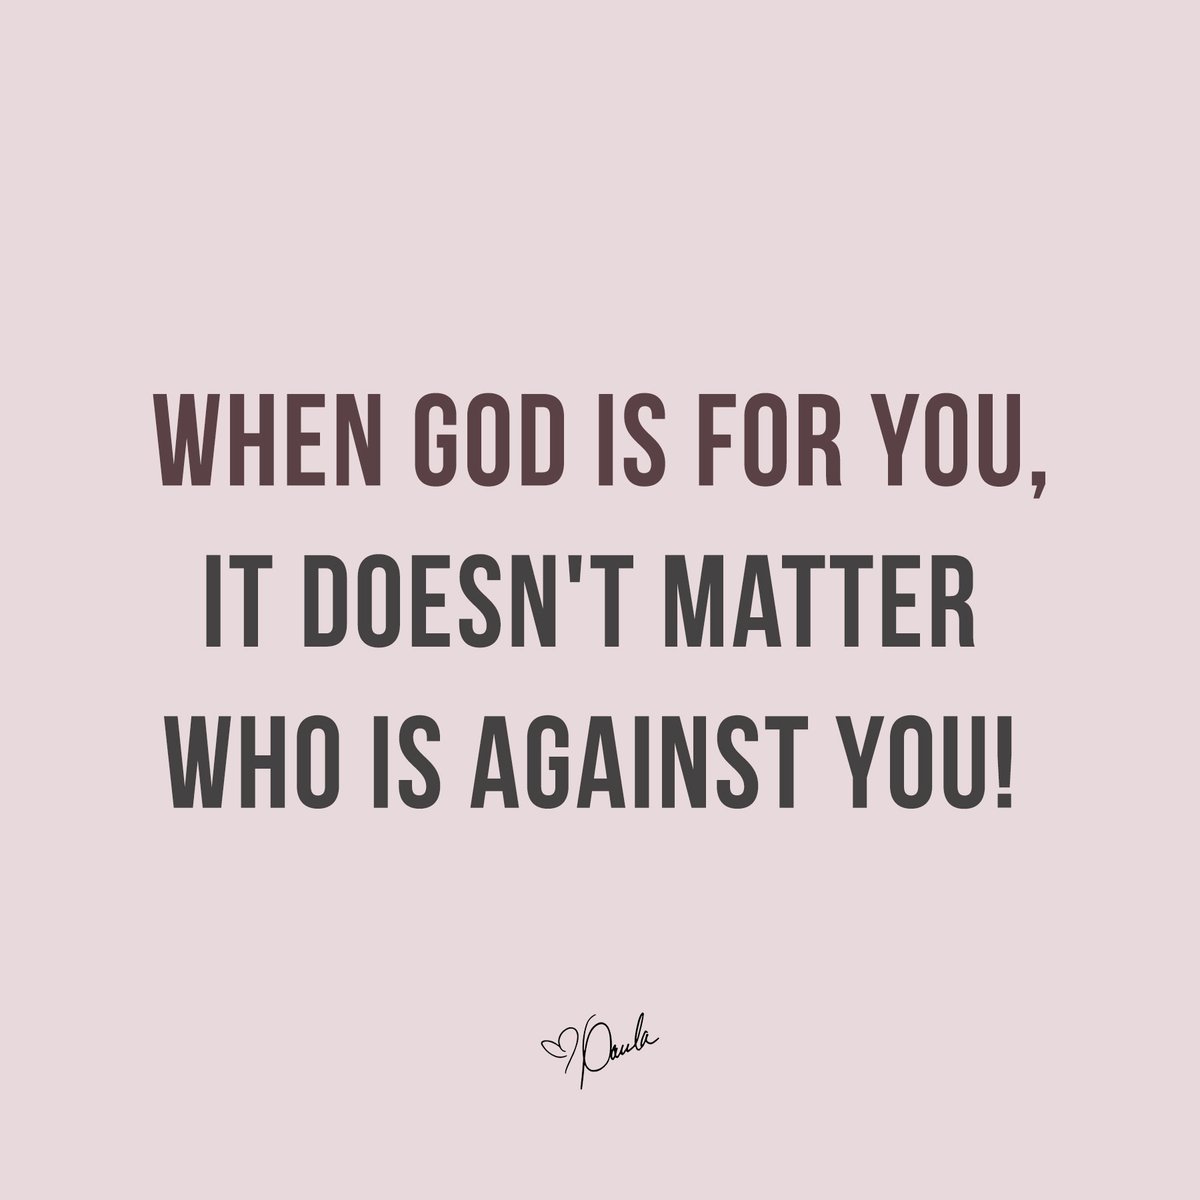 When God is for you, it doesn't matter who is against you! Rest in Him